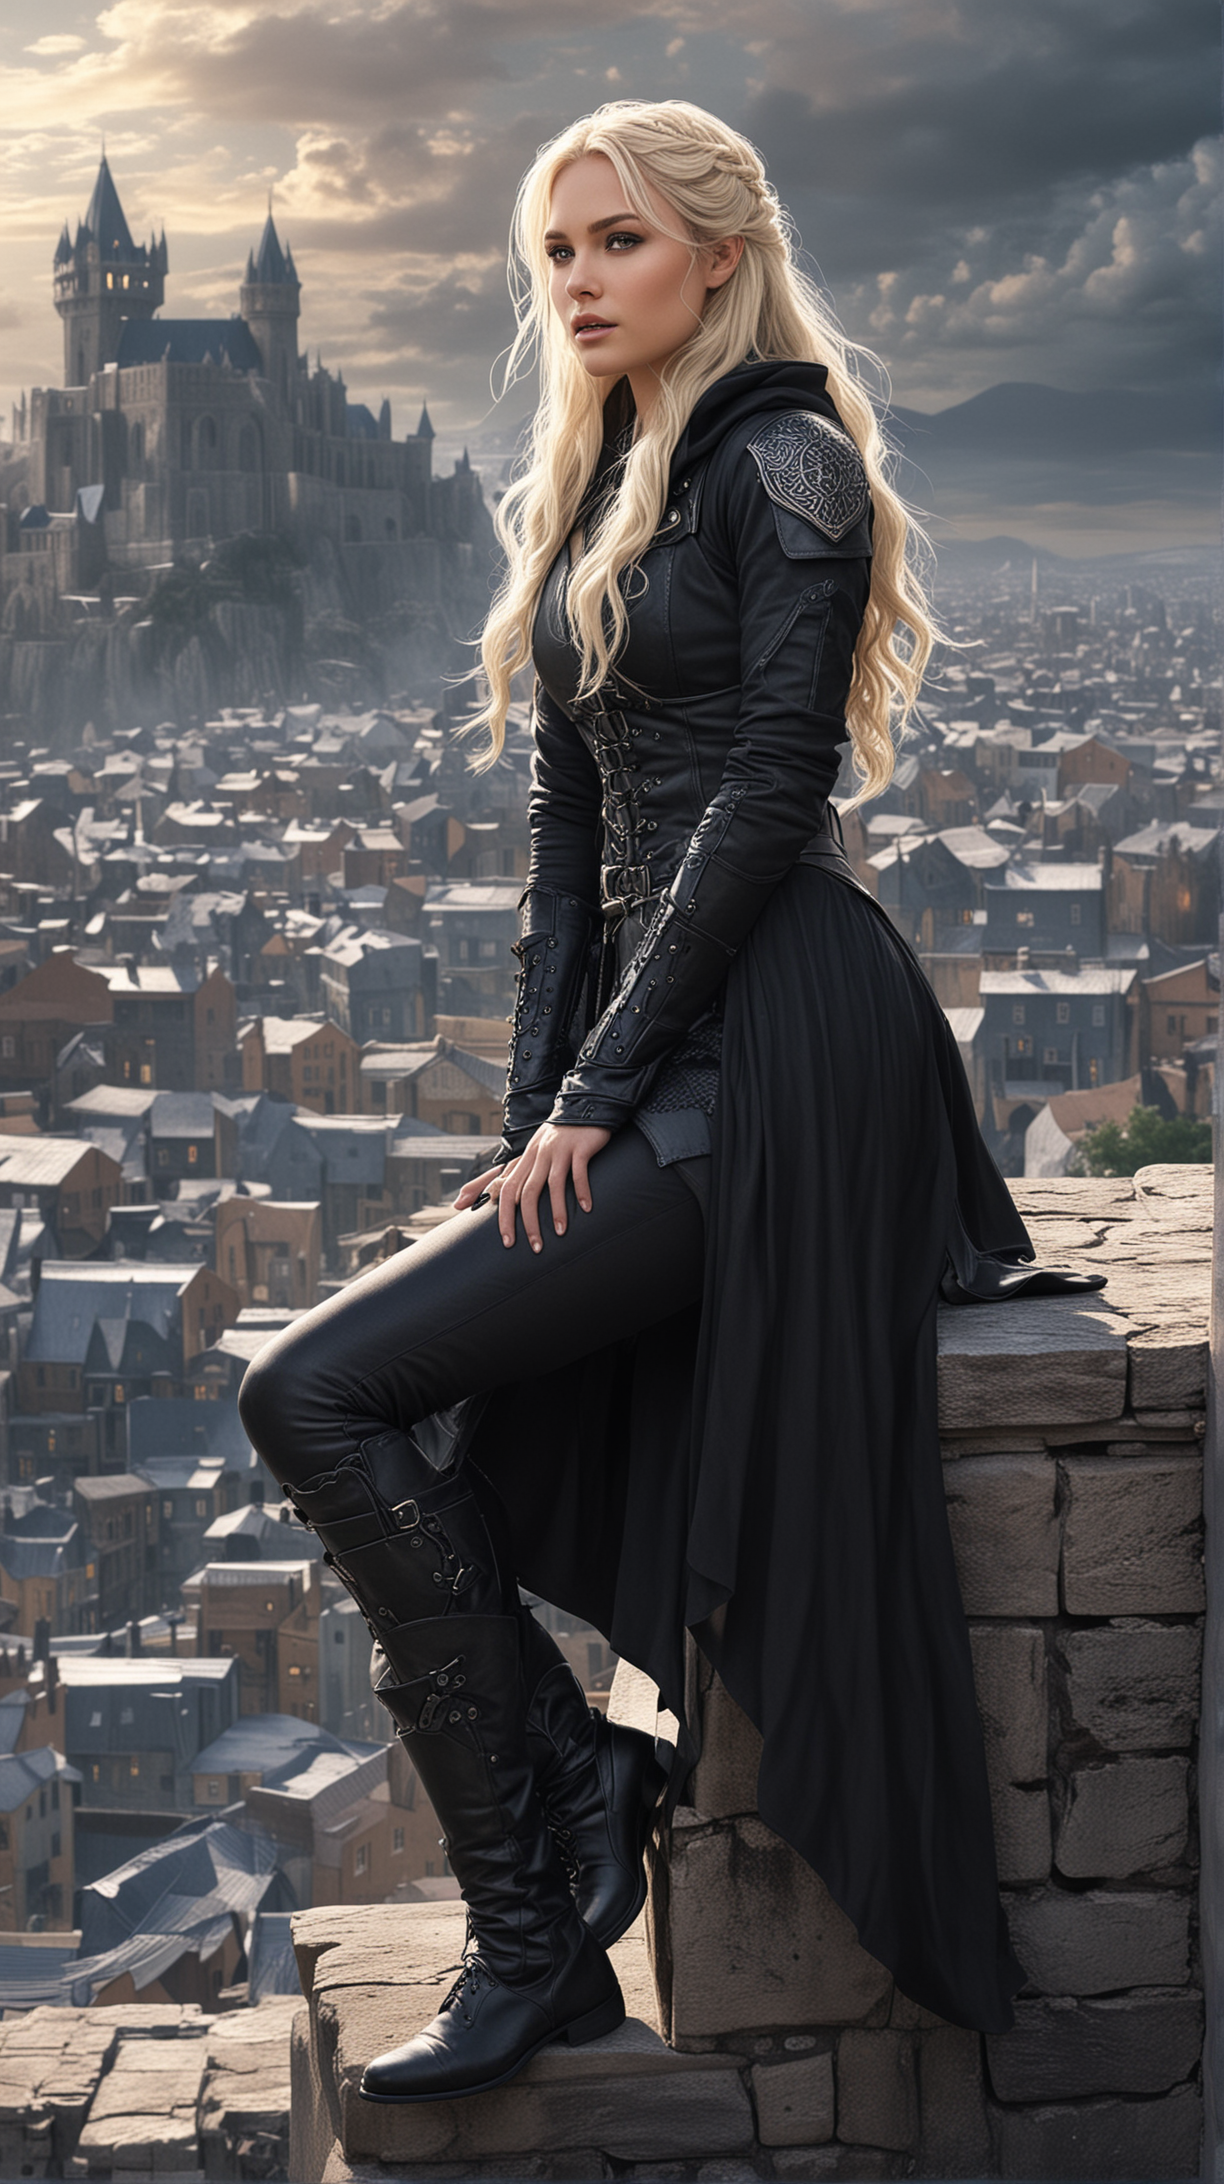 Celaena Sardothien in the city of Rifthold From Throne of glass series by Sarah J Maas. She should be CROUCHING like an assassin on top of the city’s houses and dressed in black